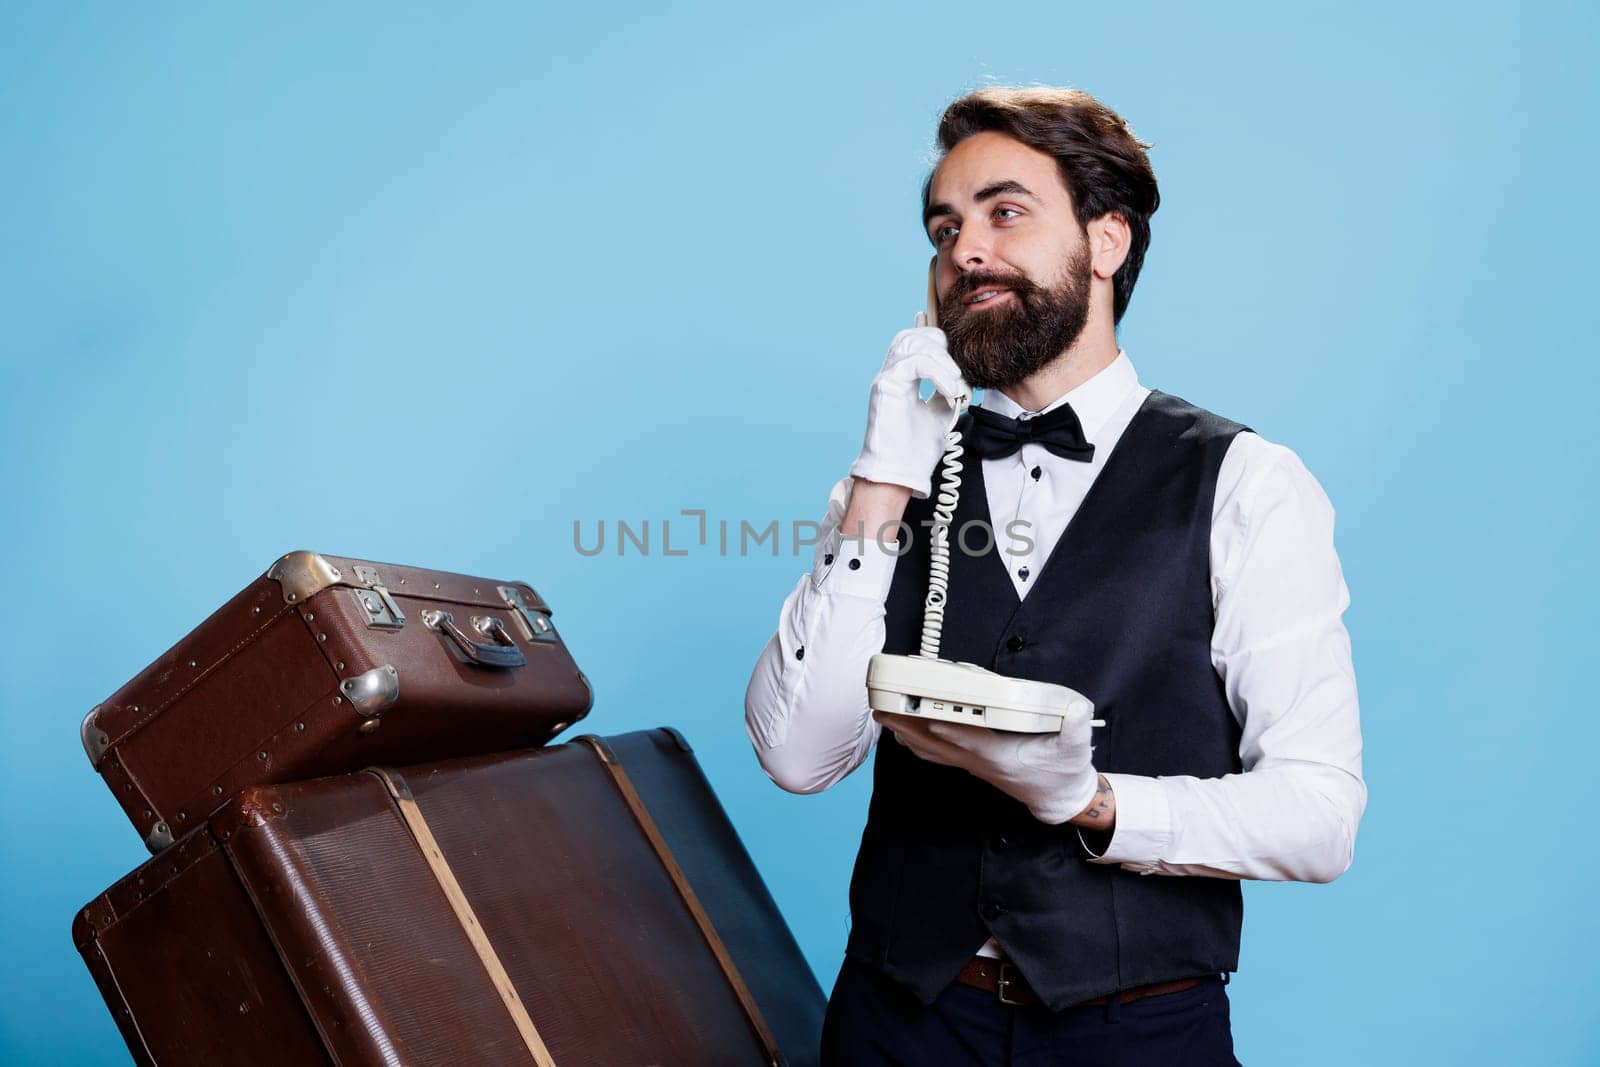 Stylish bellboy answers landline phone in studio, talking to hotel guests about accommodation. Skilled confident doorman using telephone with cord to take calls, vintage luxurious job.